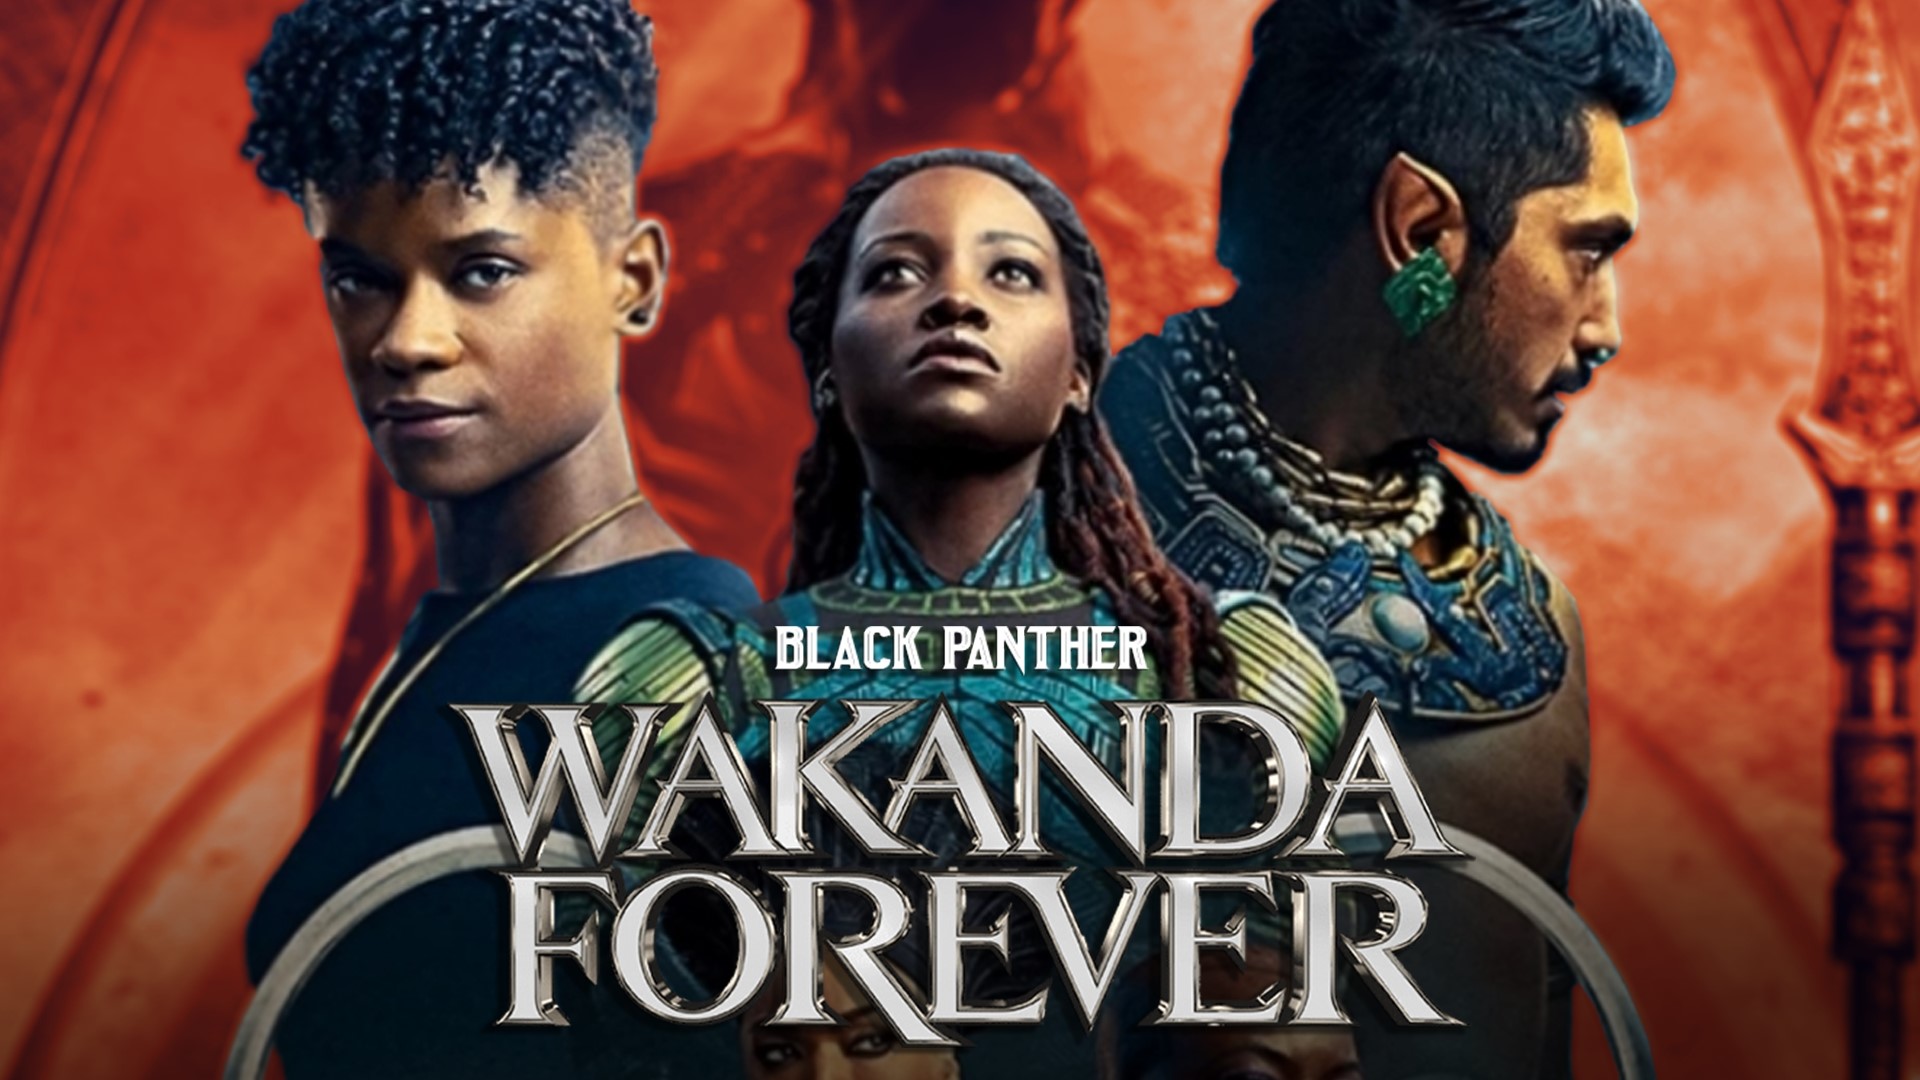 The people of Wakanda deal with losing T'Challa as Namor uses his own grief to exact revenge. Ryan Coogler delivers a solid movie anchored by iconic acting.